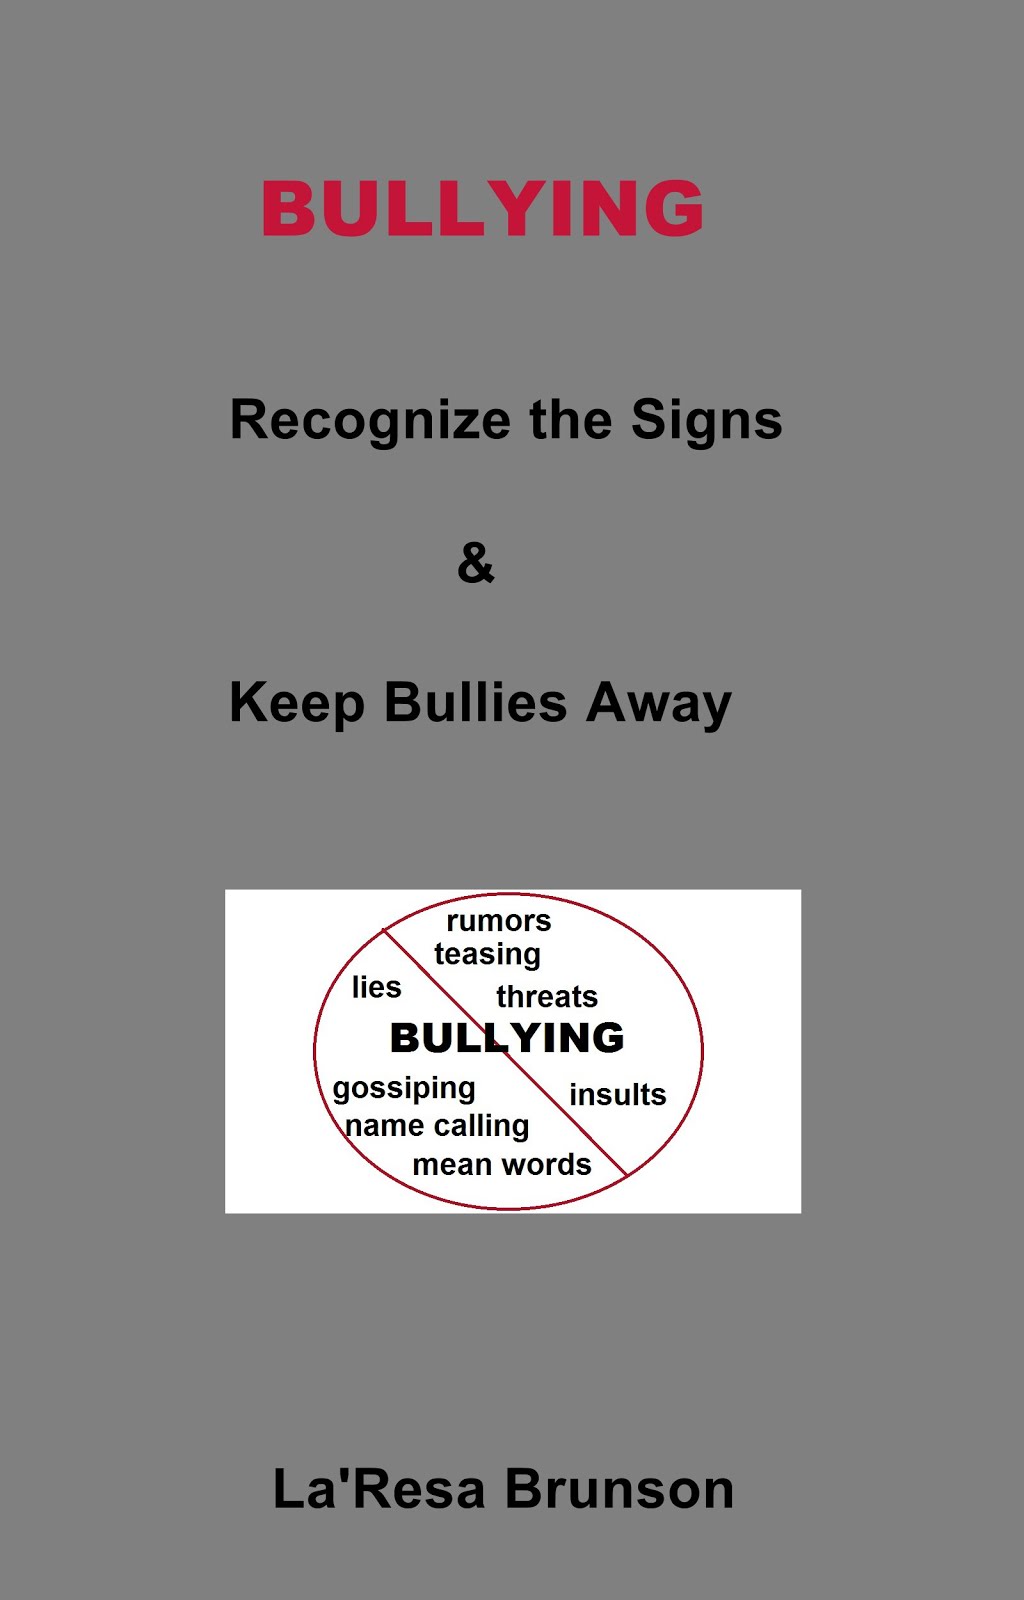 Bullying: Recognize the Signs & Keep Bullies Away